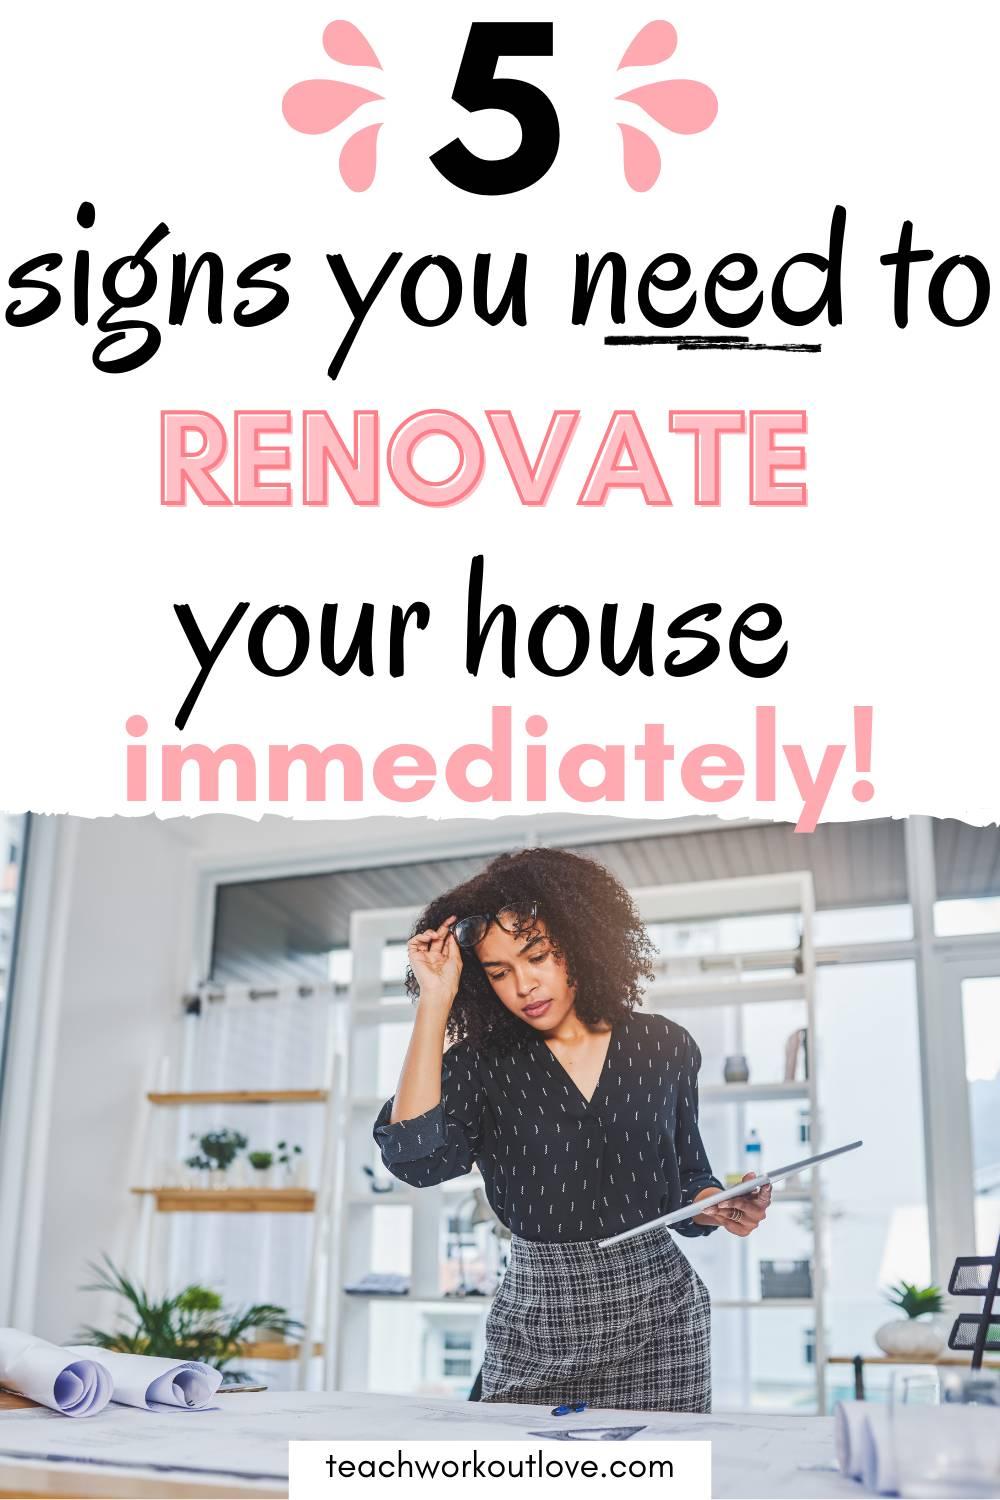 As a house owner, you must take care of your house because it has to be presentable all the time. Check these signs to renovate your house.